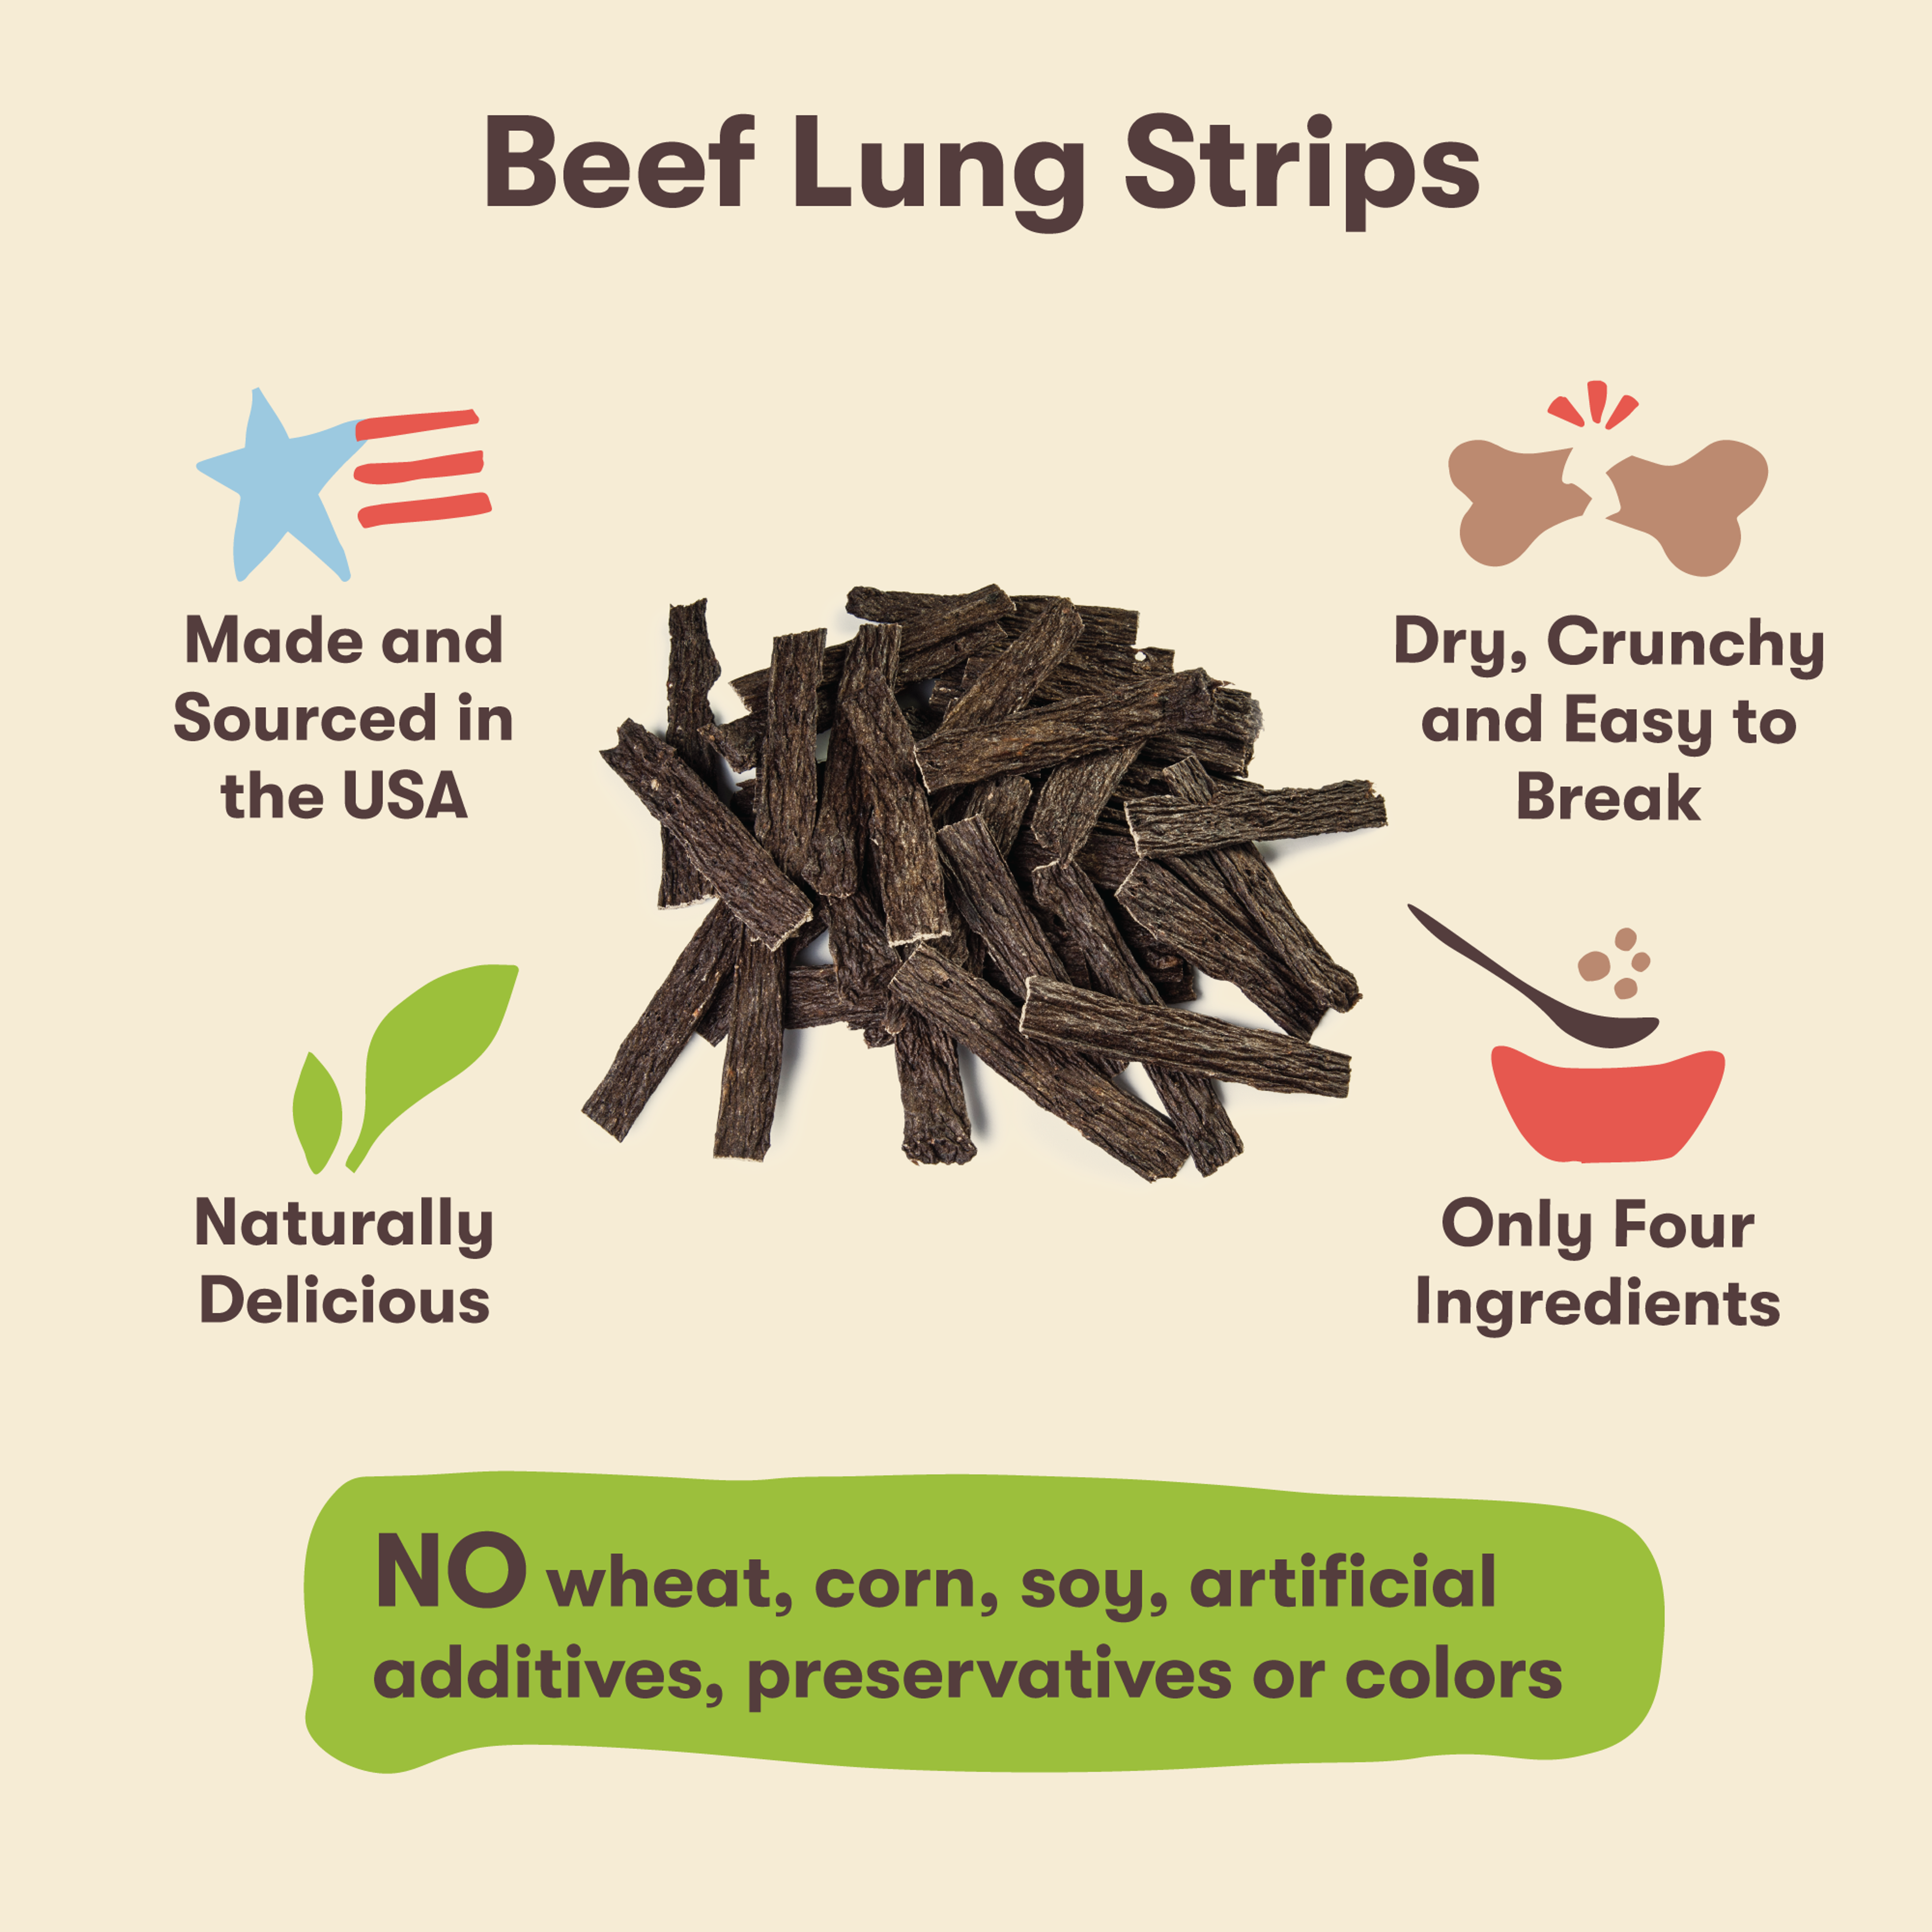 USA Beef Lung Strips